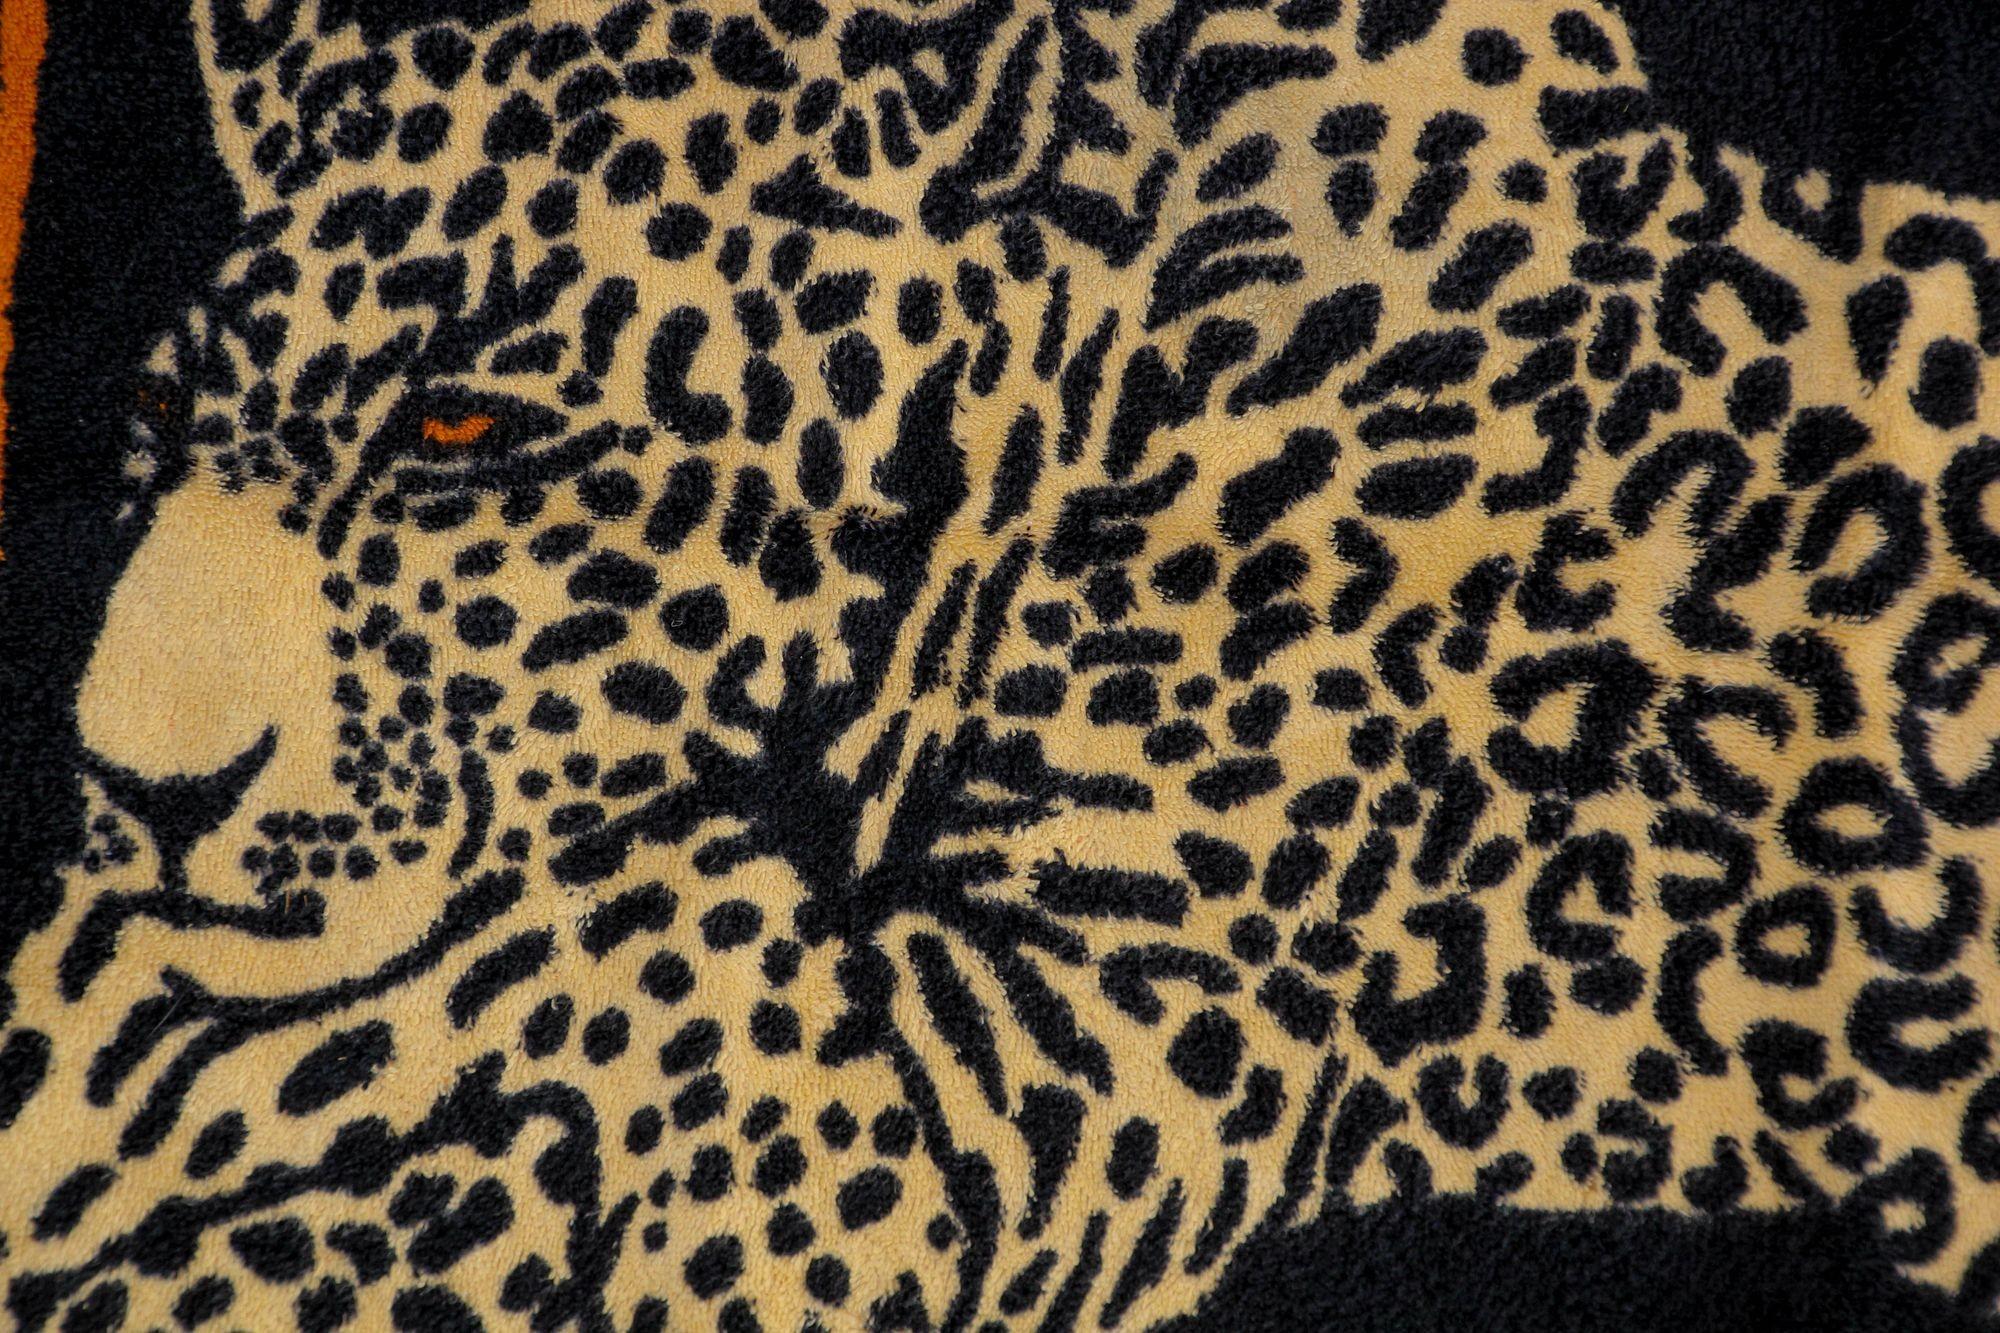 French Hermes Paris Small Bath Mat with a Leopard Print in Black and Orange